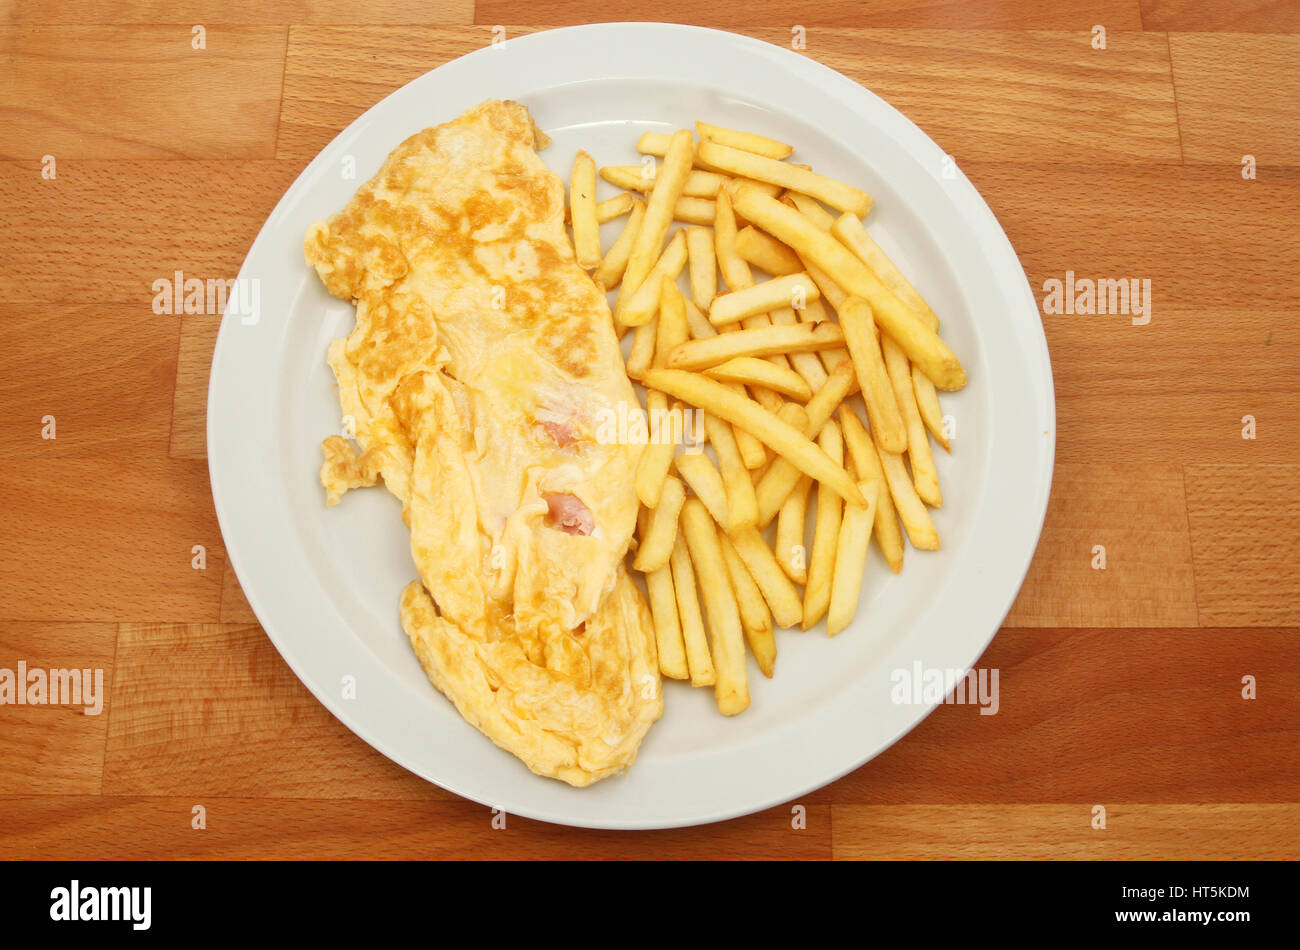 Ham and cheese omelette with French fries on a plate on a wooden tabletop Stock Photo